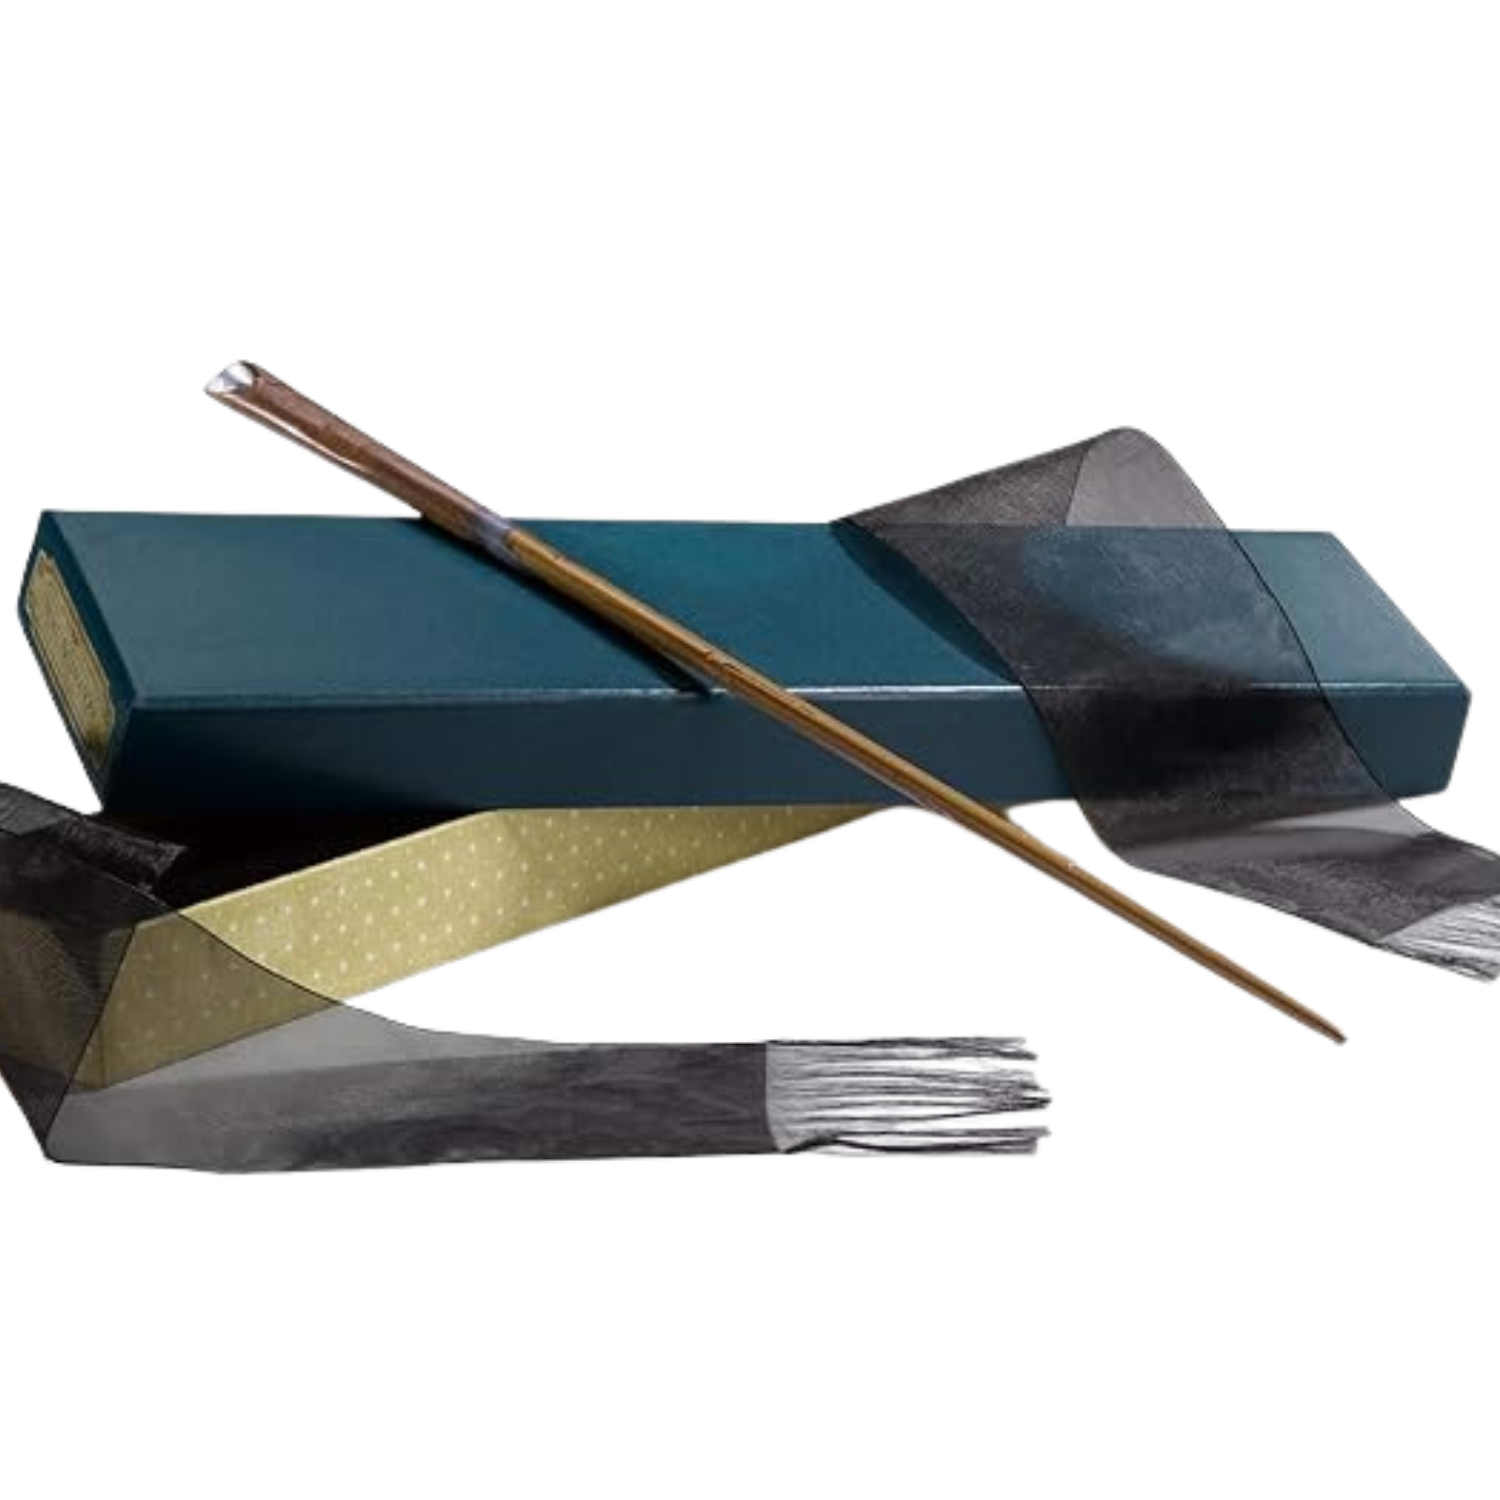 This image shows Newt Scamander's wand from the Fantastic Beast and Harry Potter series leaning against its box